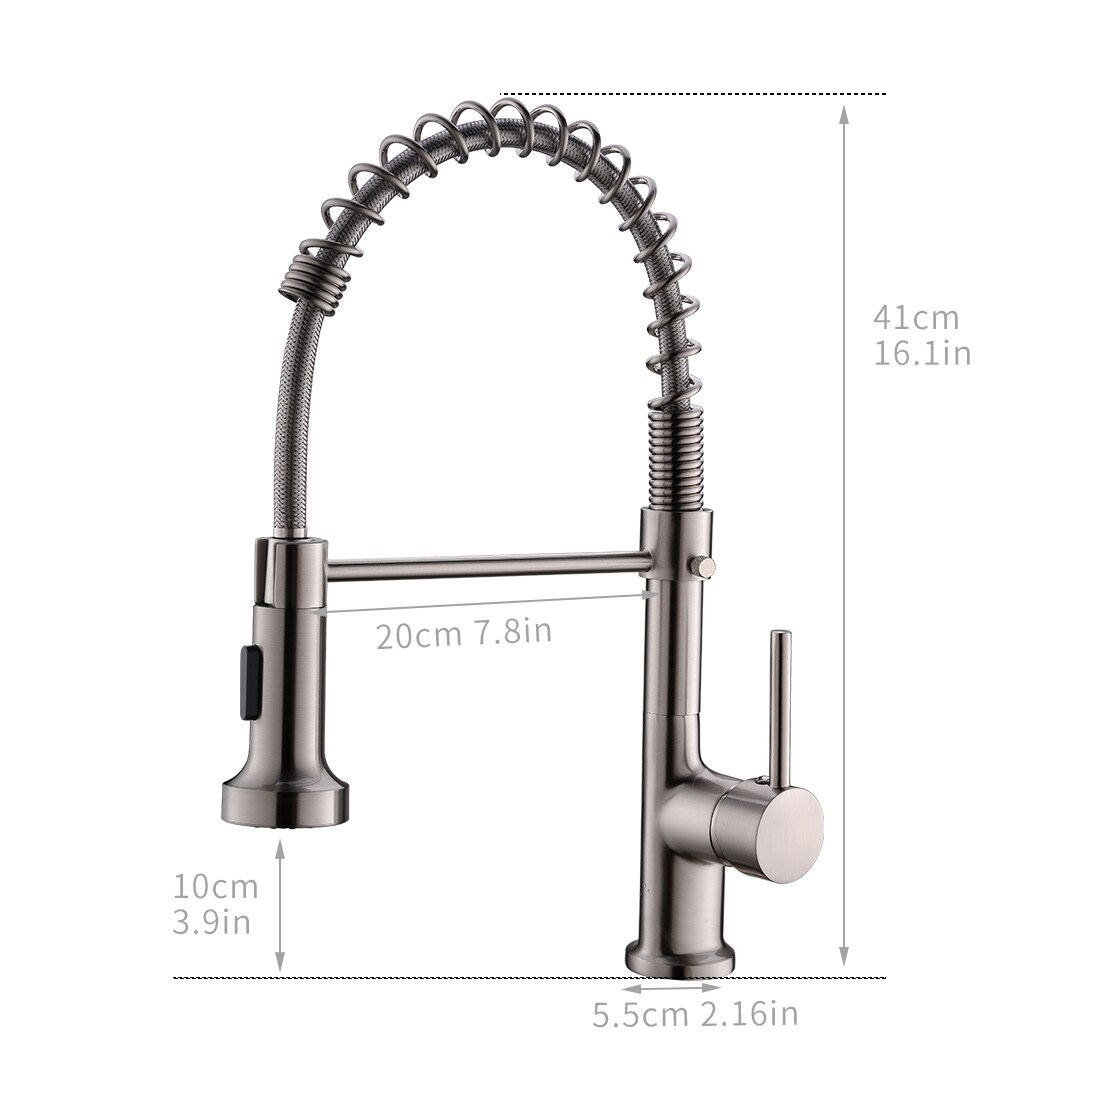 Tableware Shower 2 Hole Mixer Tap 20cm hole spacing 